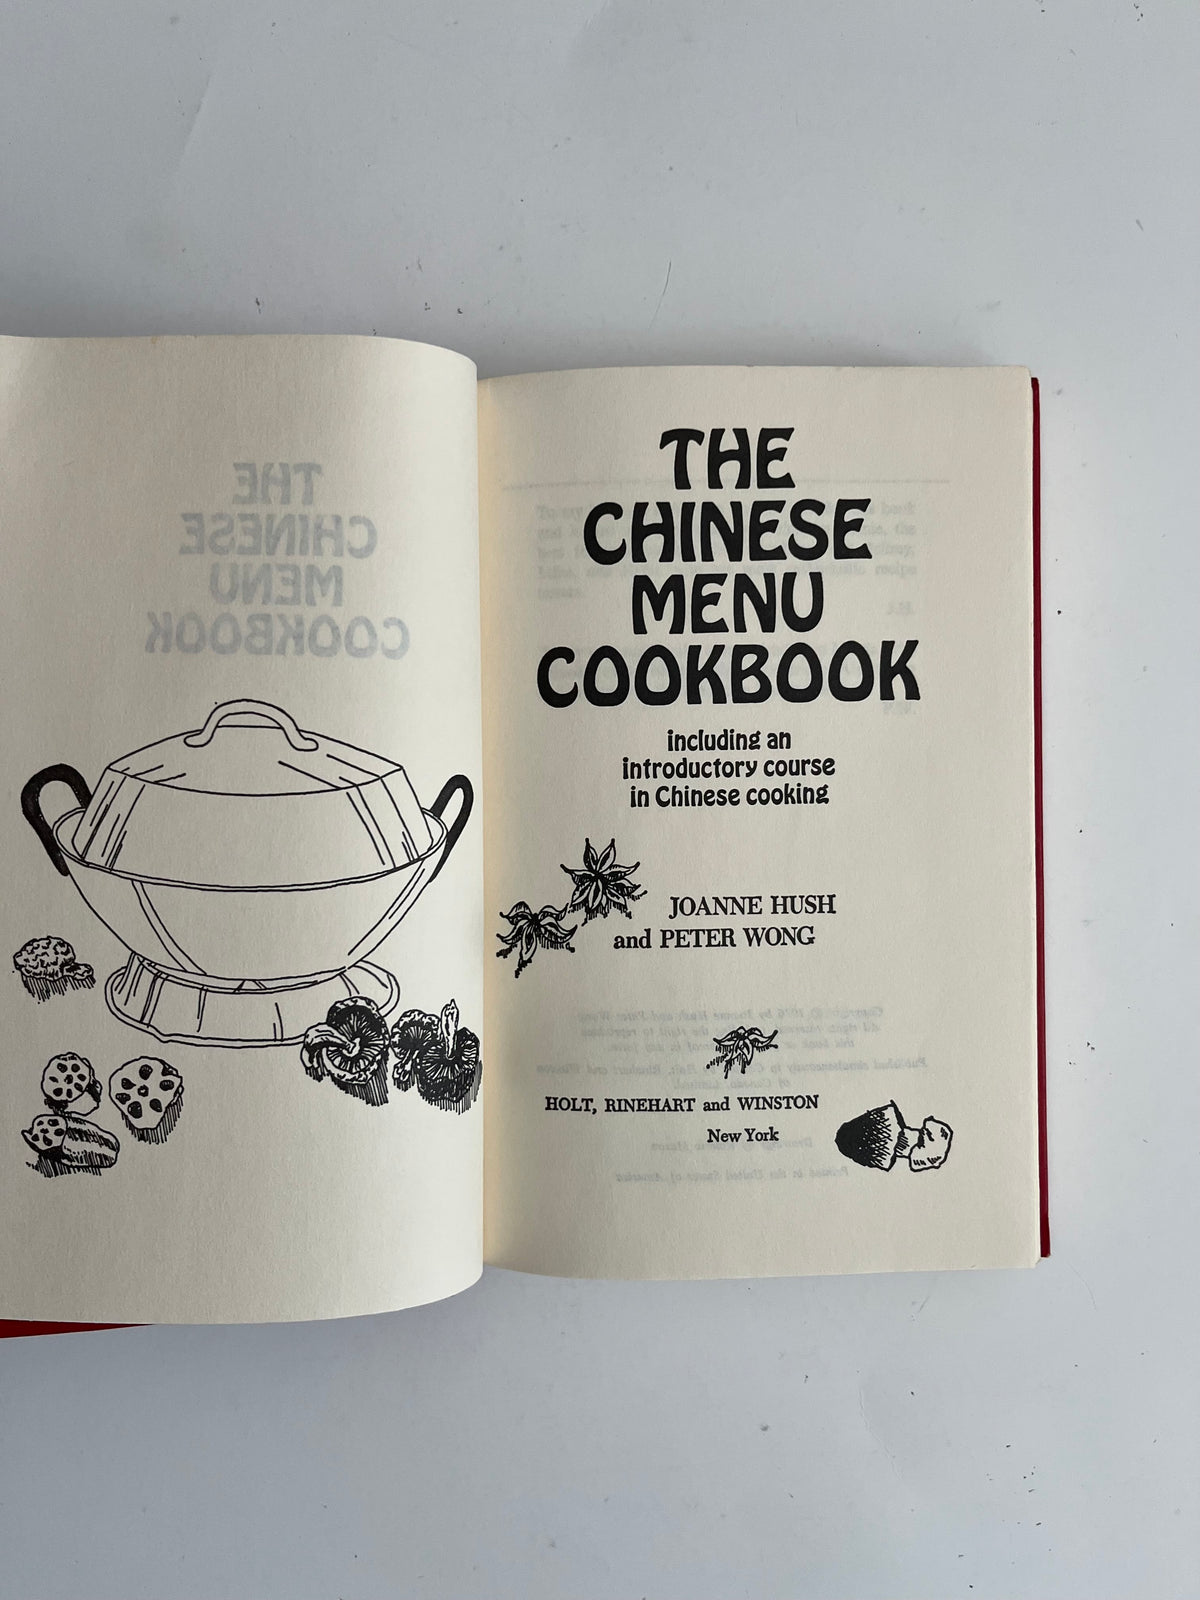 The Chinese Menu Cookbook by Joanne Hush &amp; Peter Wong